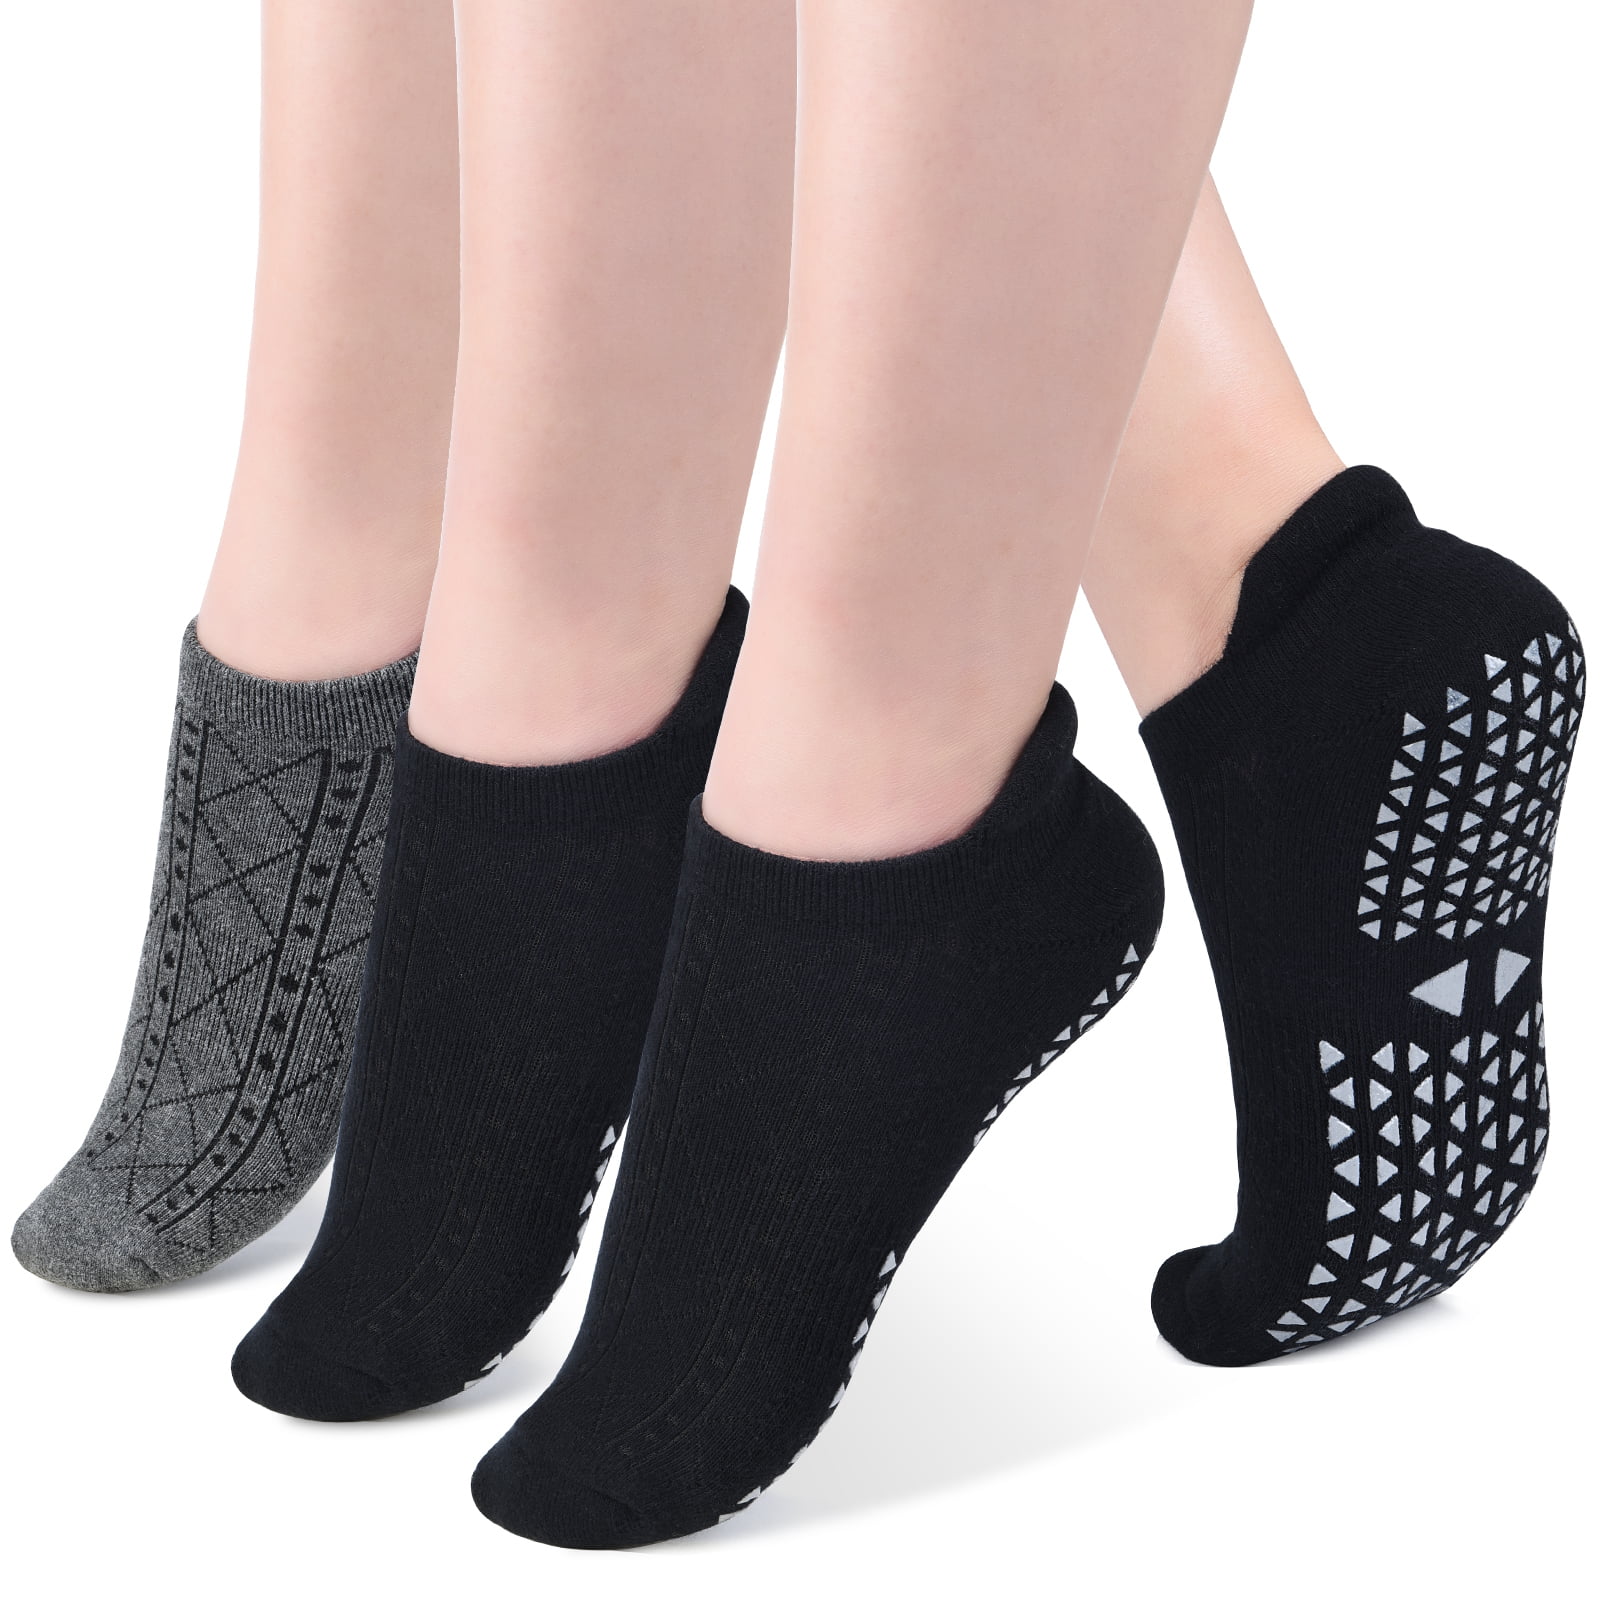 Great for Hospital Stays Too! Barre Right Purpose Bamboo Non Slip Yoga and Pilates Socks for Women-So Grippy and Soft